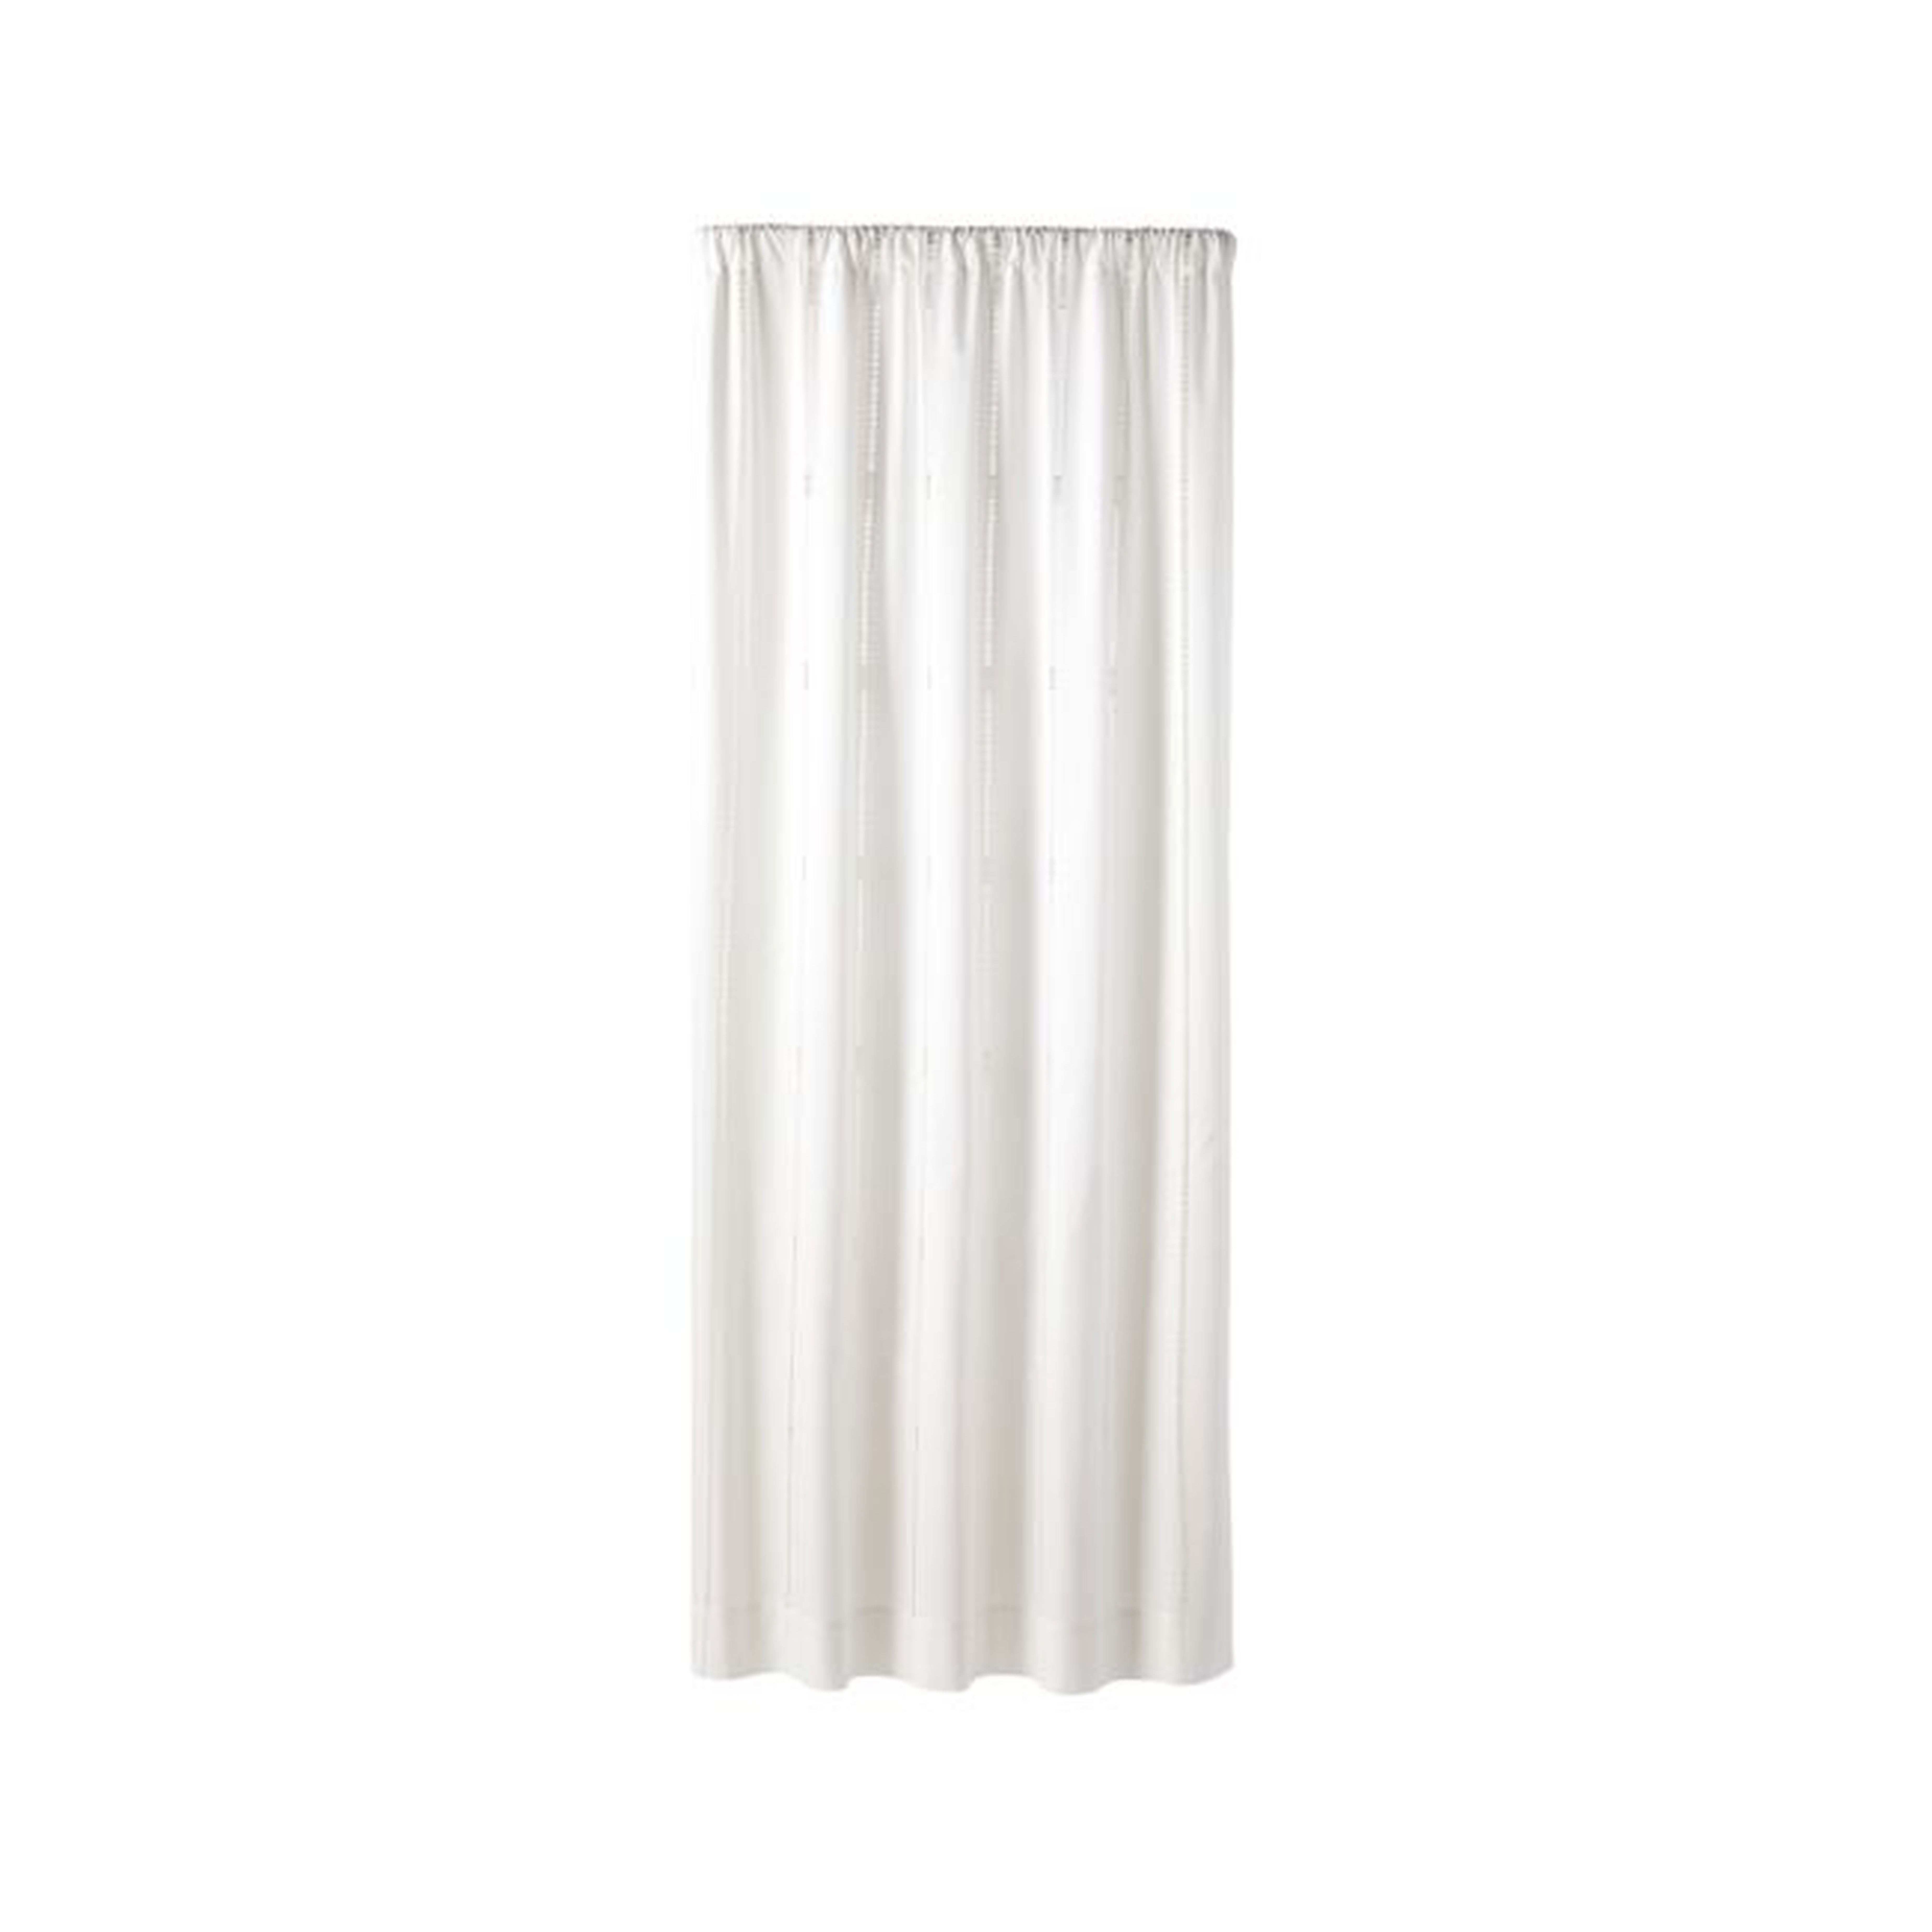 Eyelet White Curtain Panel 50"x84" - Crate and Barrel